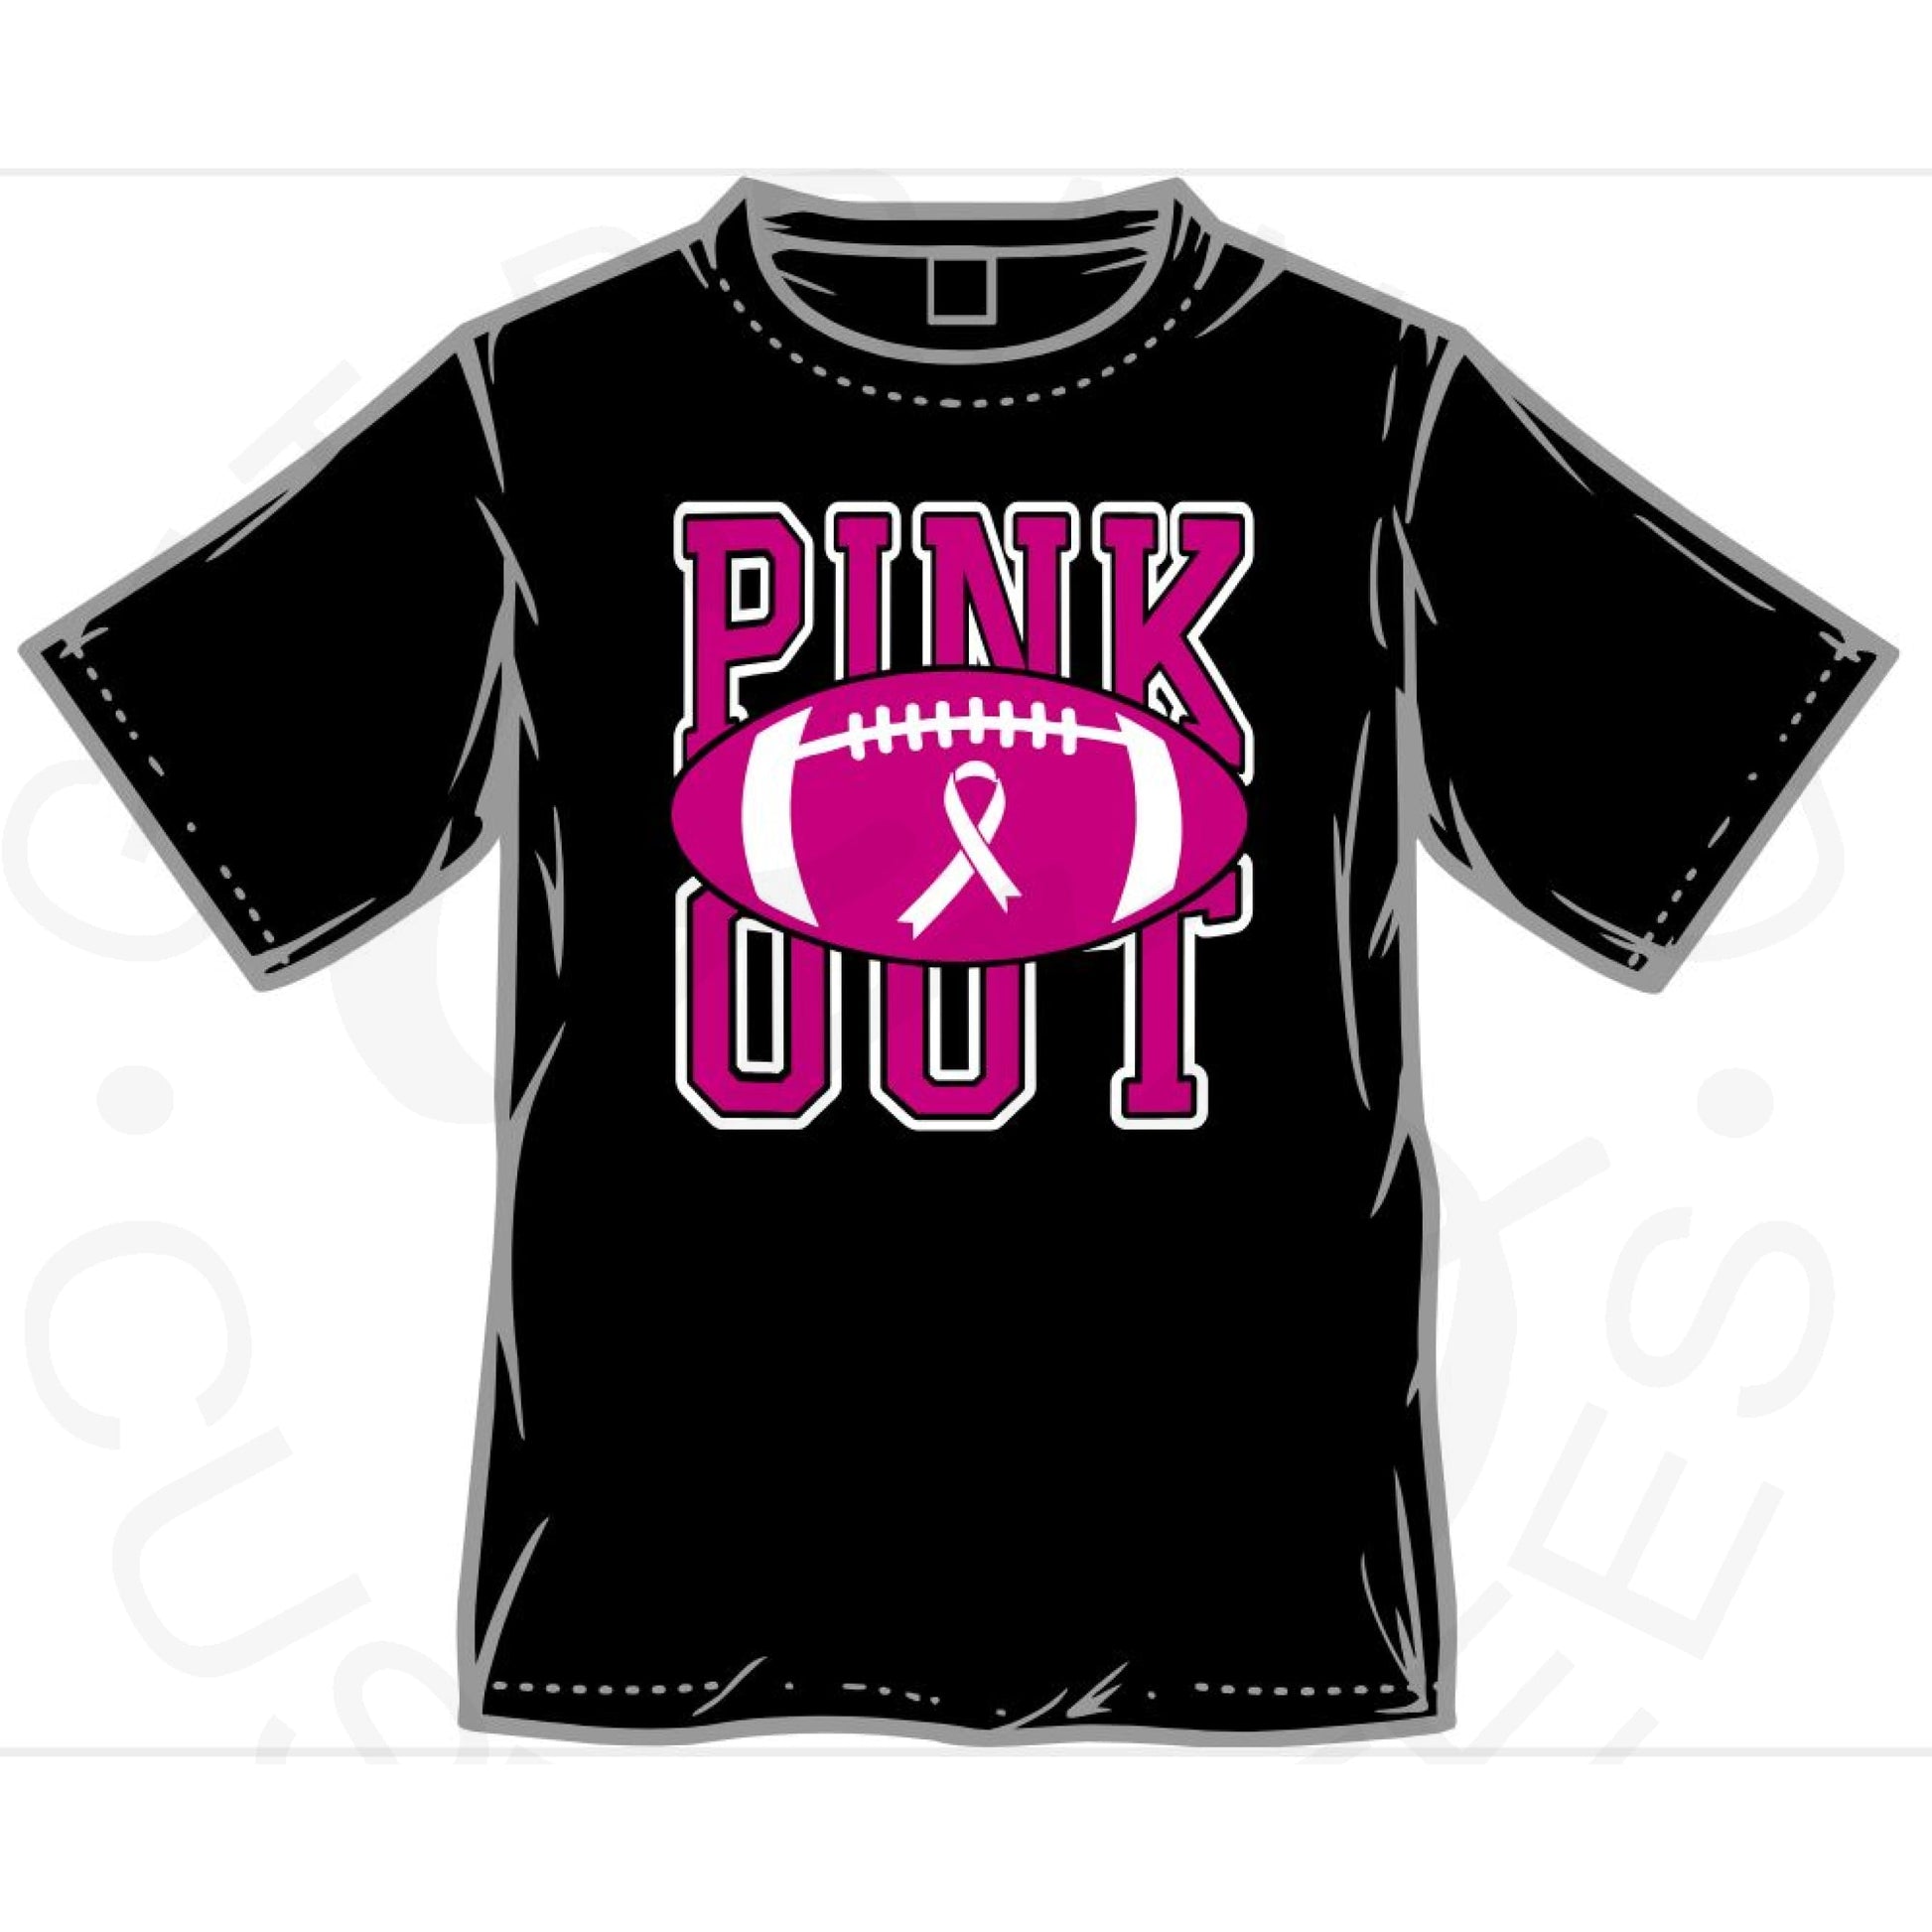 Pink Out- Football